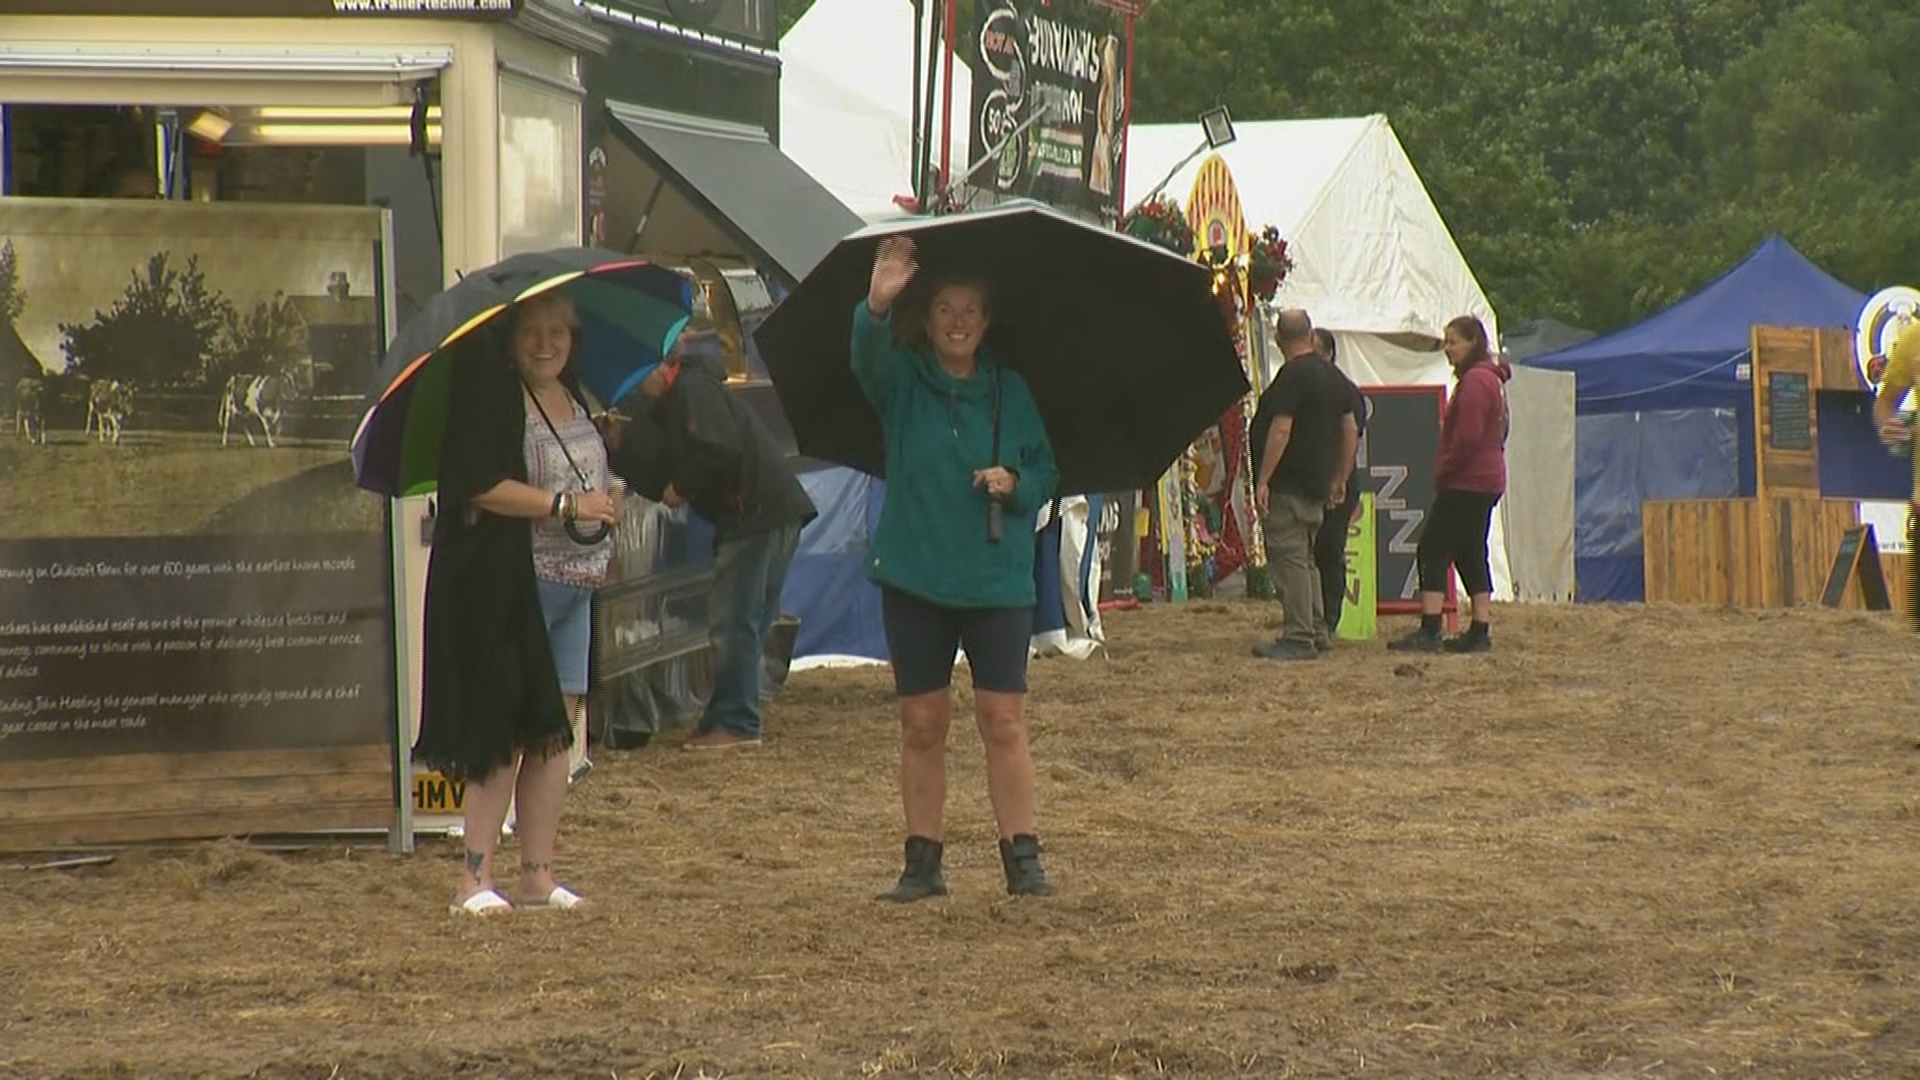 The 'show will go on' despite weather disrupting first day of Wickham